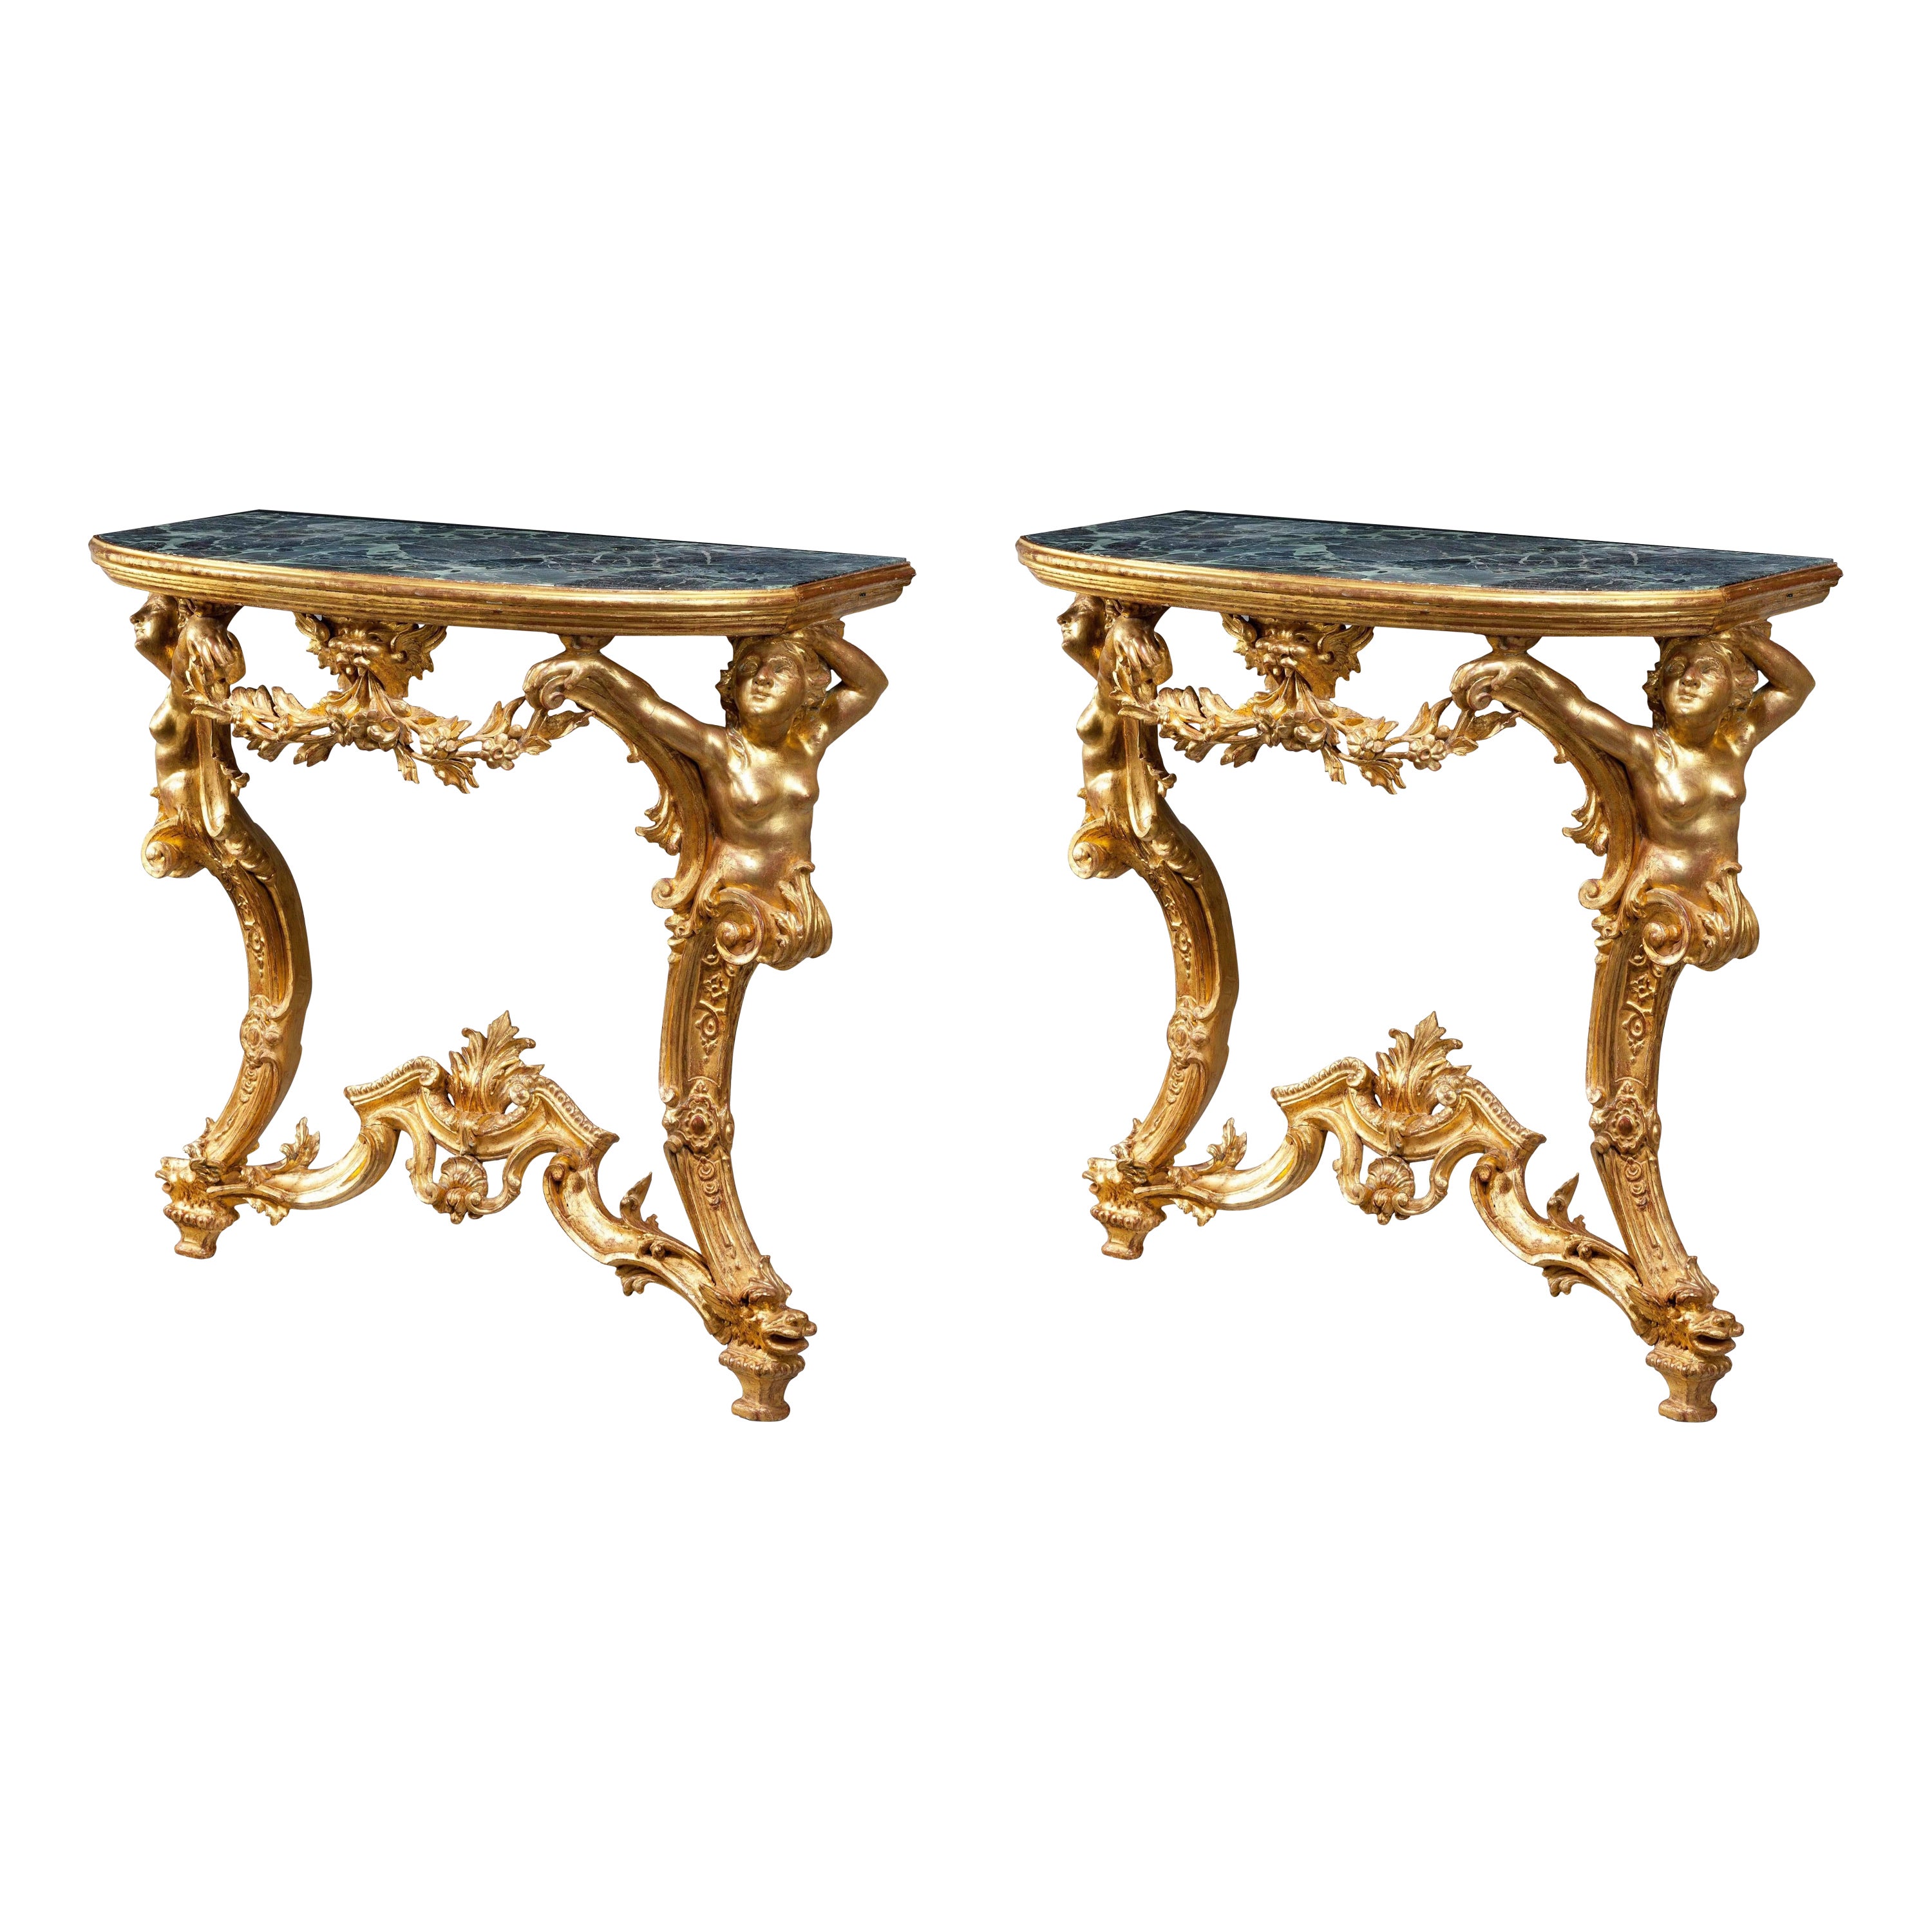 Pair of 18th Century Giltwood Pier Tables